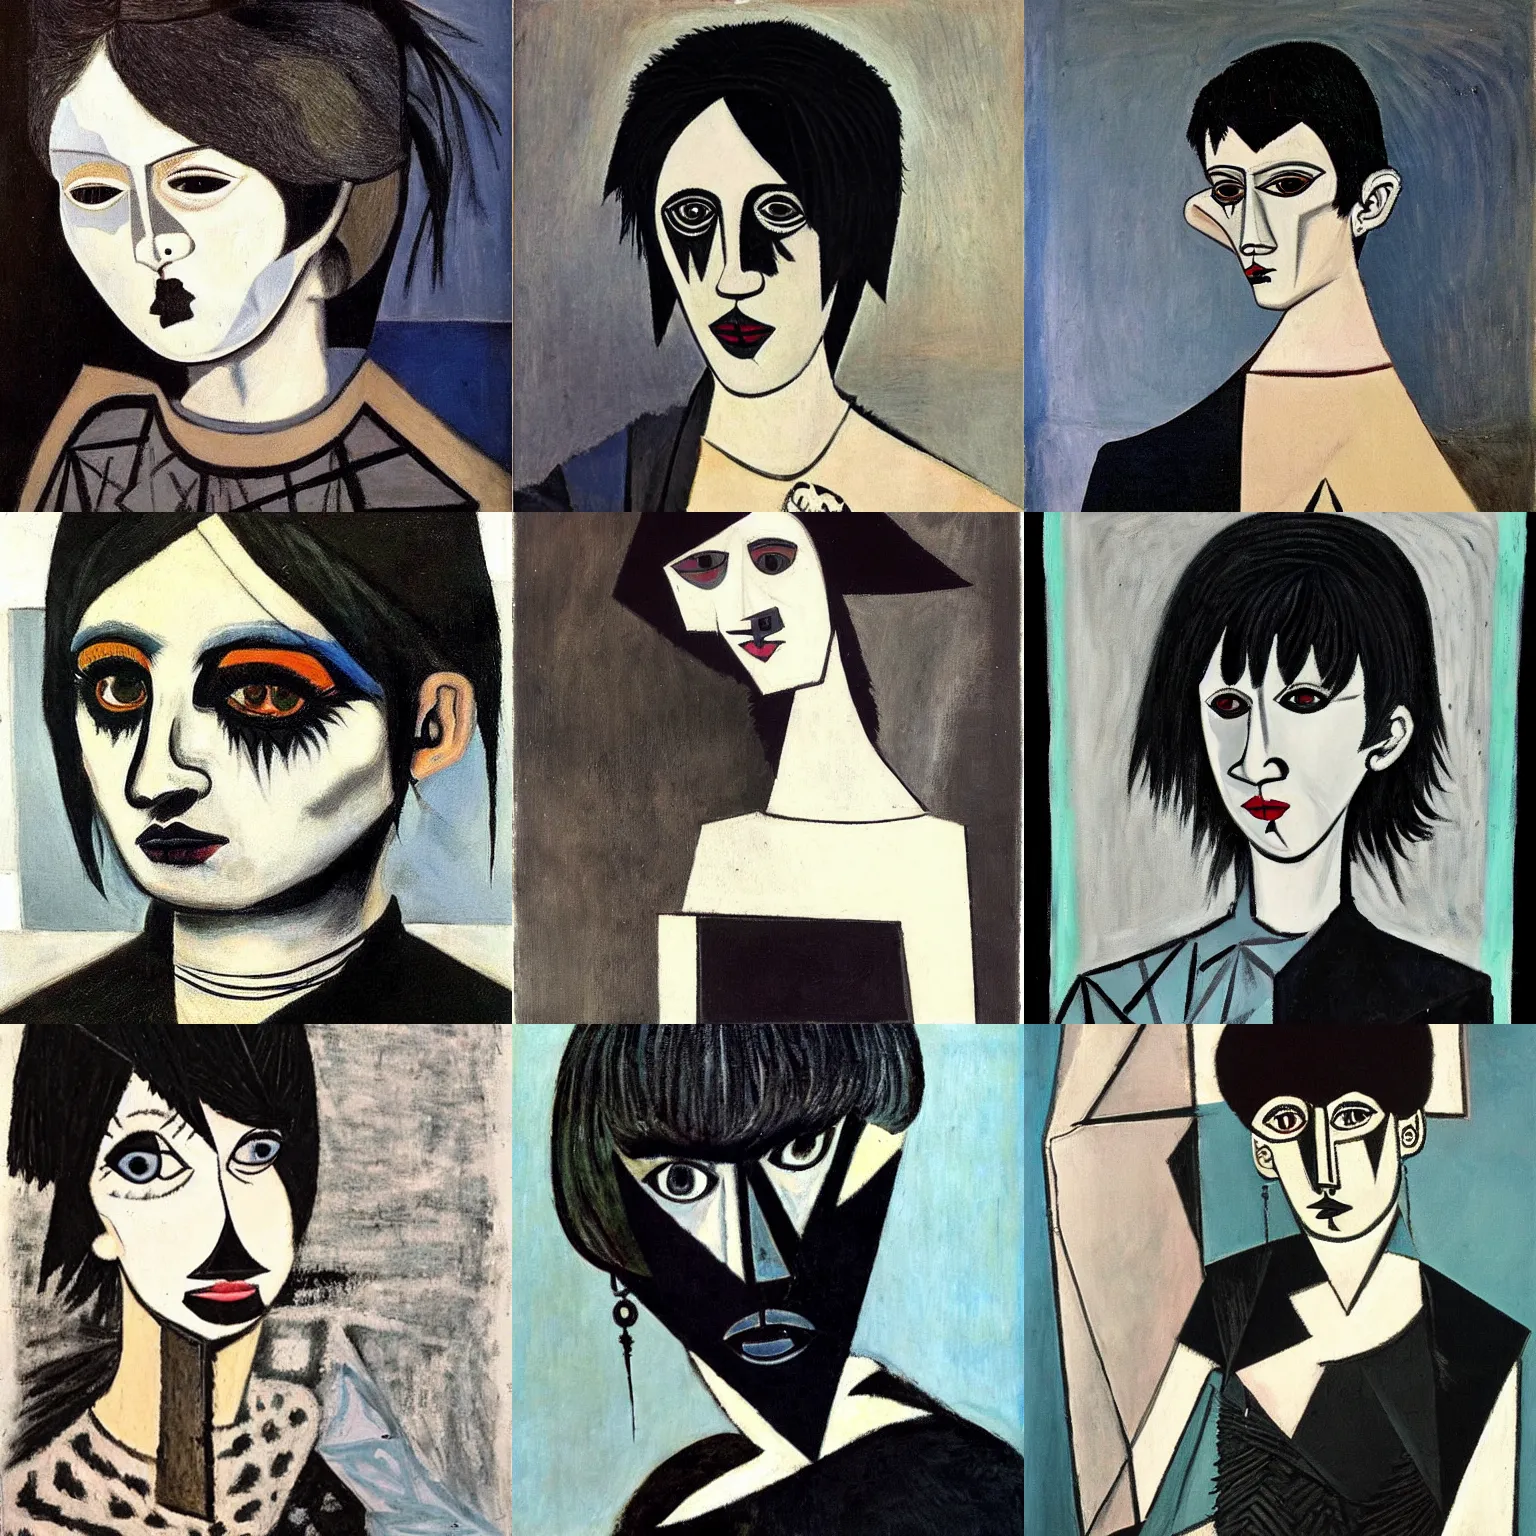 Prompt: an hd goth emo punk portrait painted by pablo picasso. her hair is dark brown and cut into a short, messy pixie cut. she has a slightly rounded face, with a pointed chin, large entirely - black eyes, and a small nose. she is wearing a black tank top, a black leather jacket, a black knee - length skirt, and a black choker.